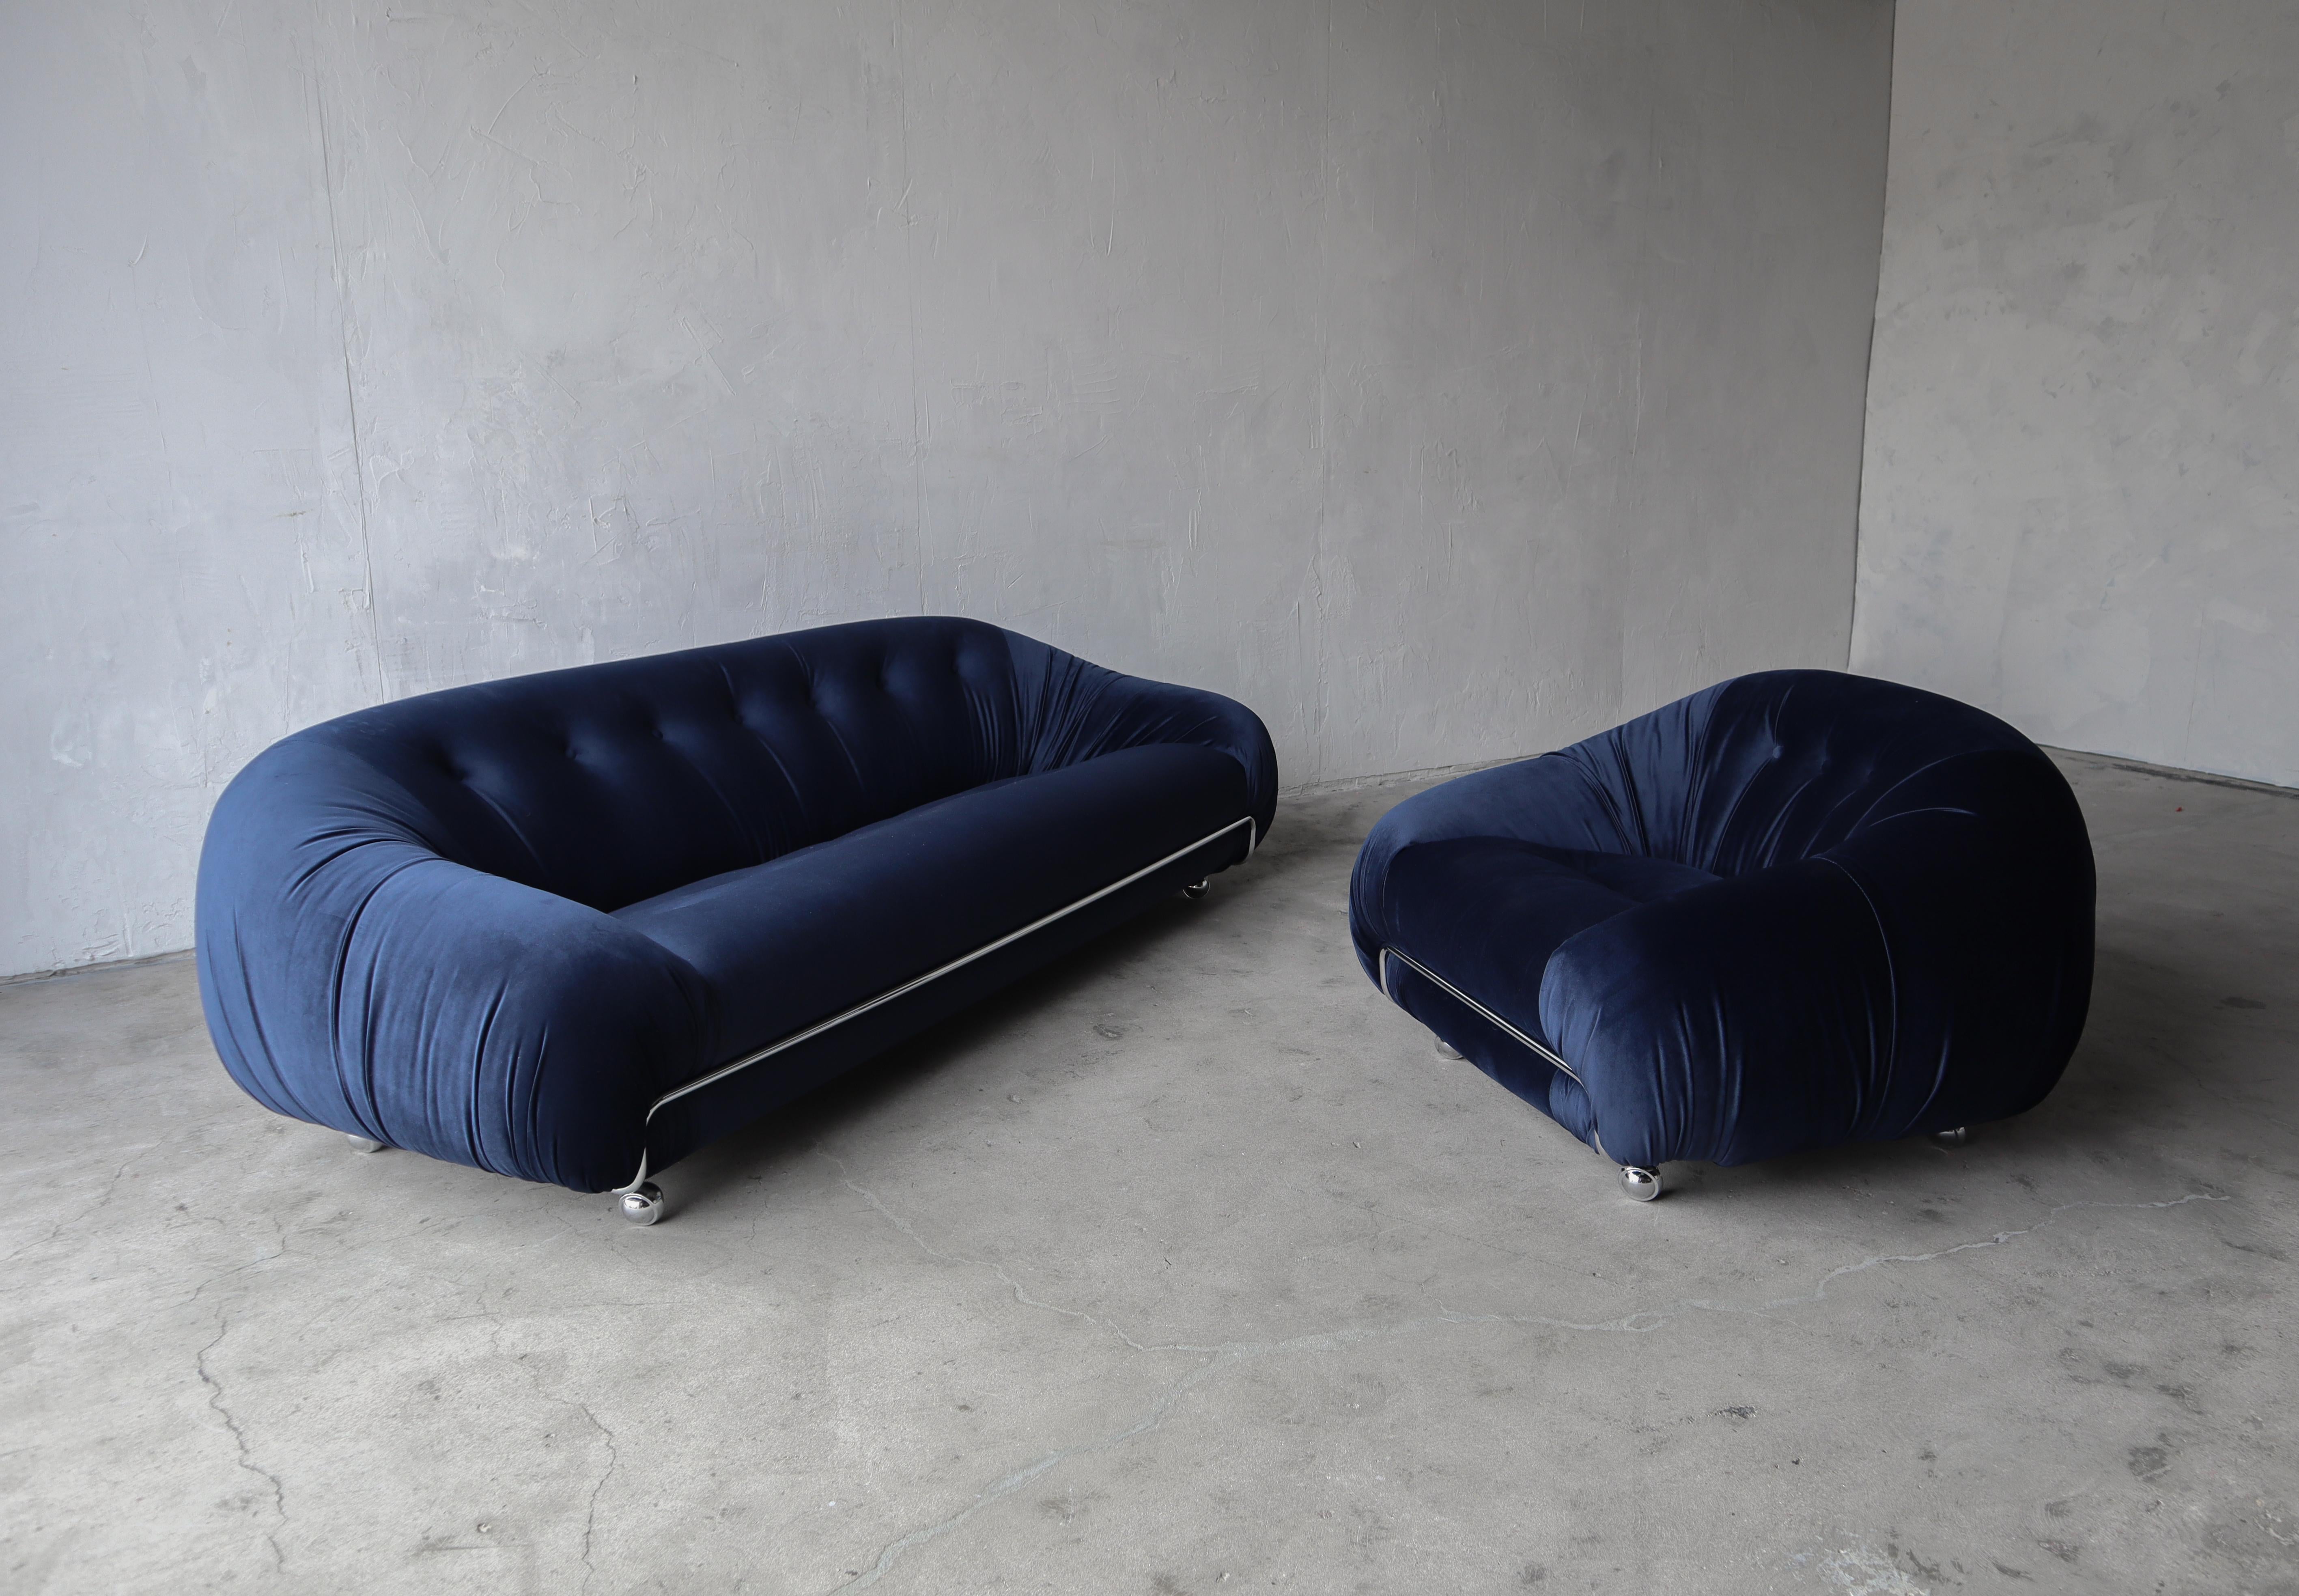 Low and luxurious, this is truly a great 70s sofa and chair set. Dressed in all new deep navy blue velvet upholstery. The set features mirrored chrome trim and new 2